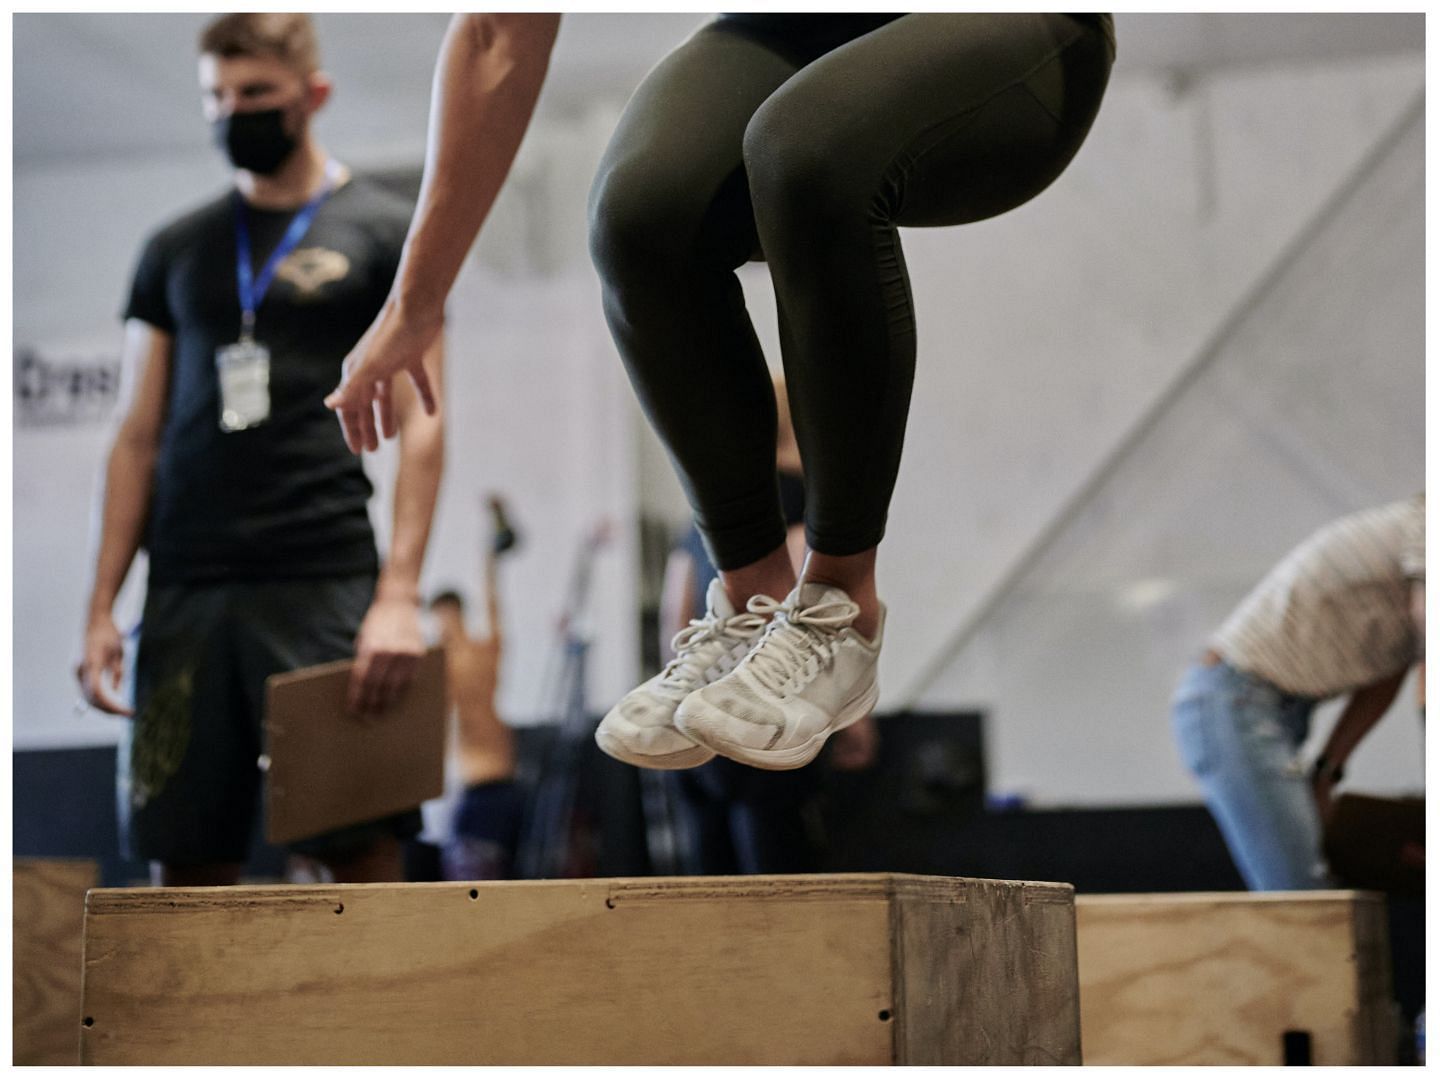 Plyo Box is a great equipment that can help strengthen your glutes. (Image via Unsplash / Bastein  Plu)